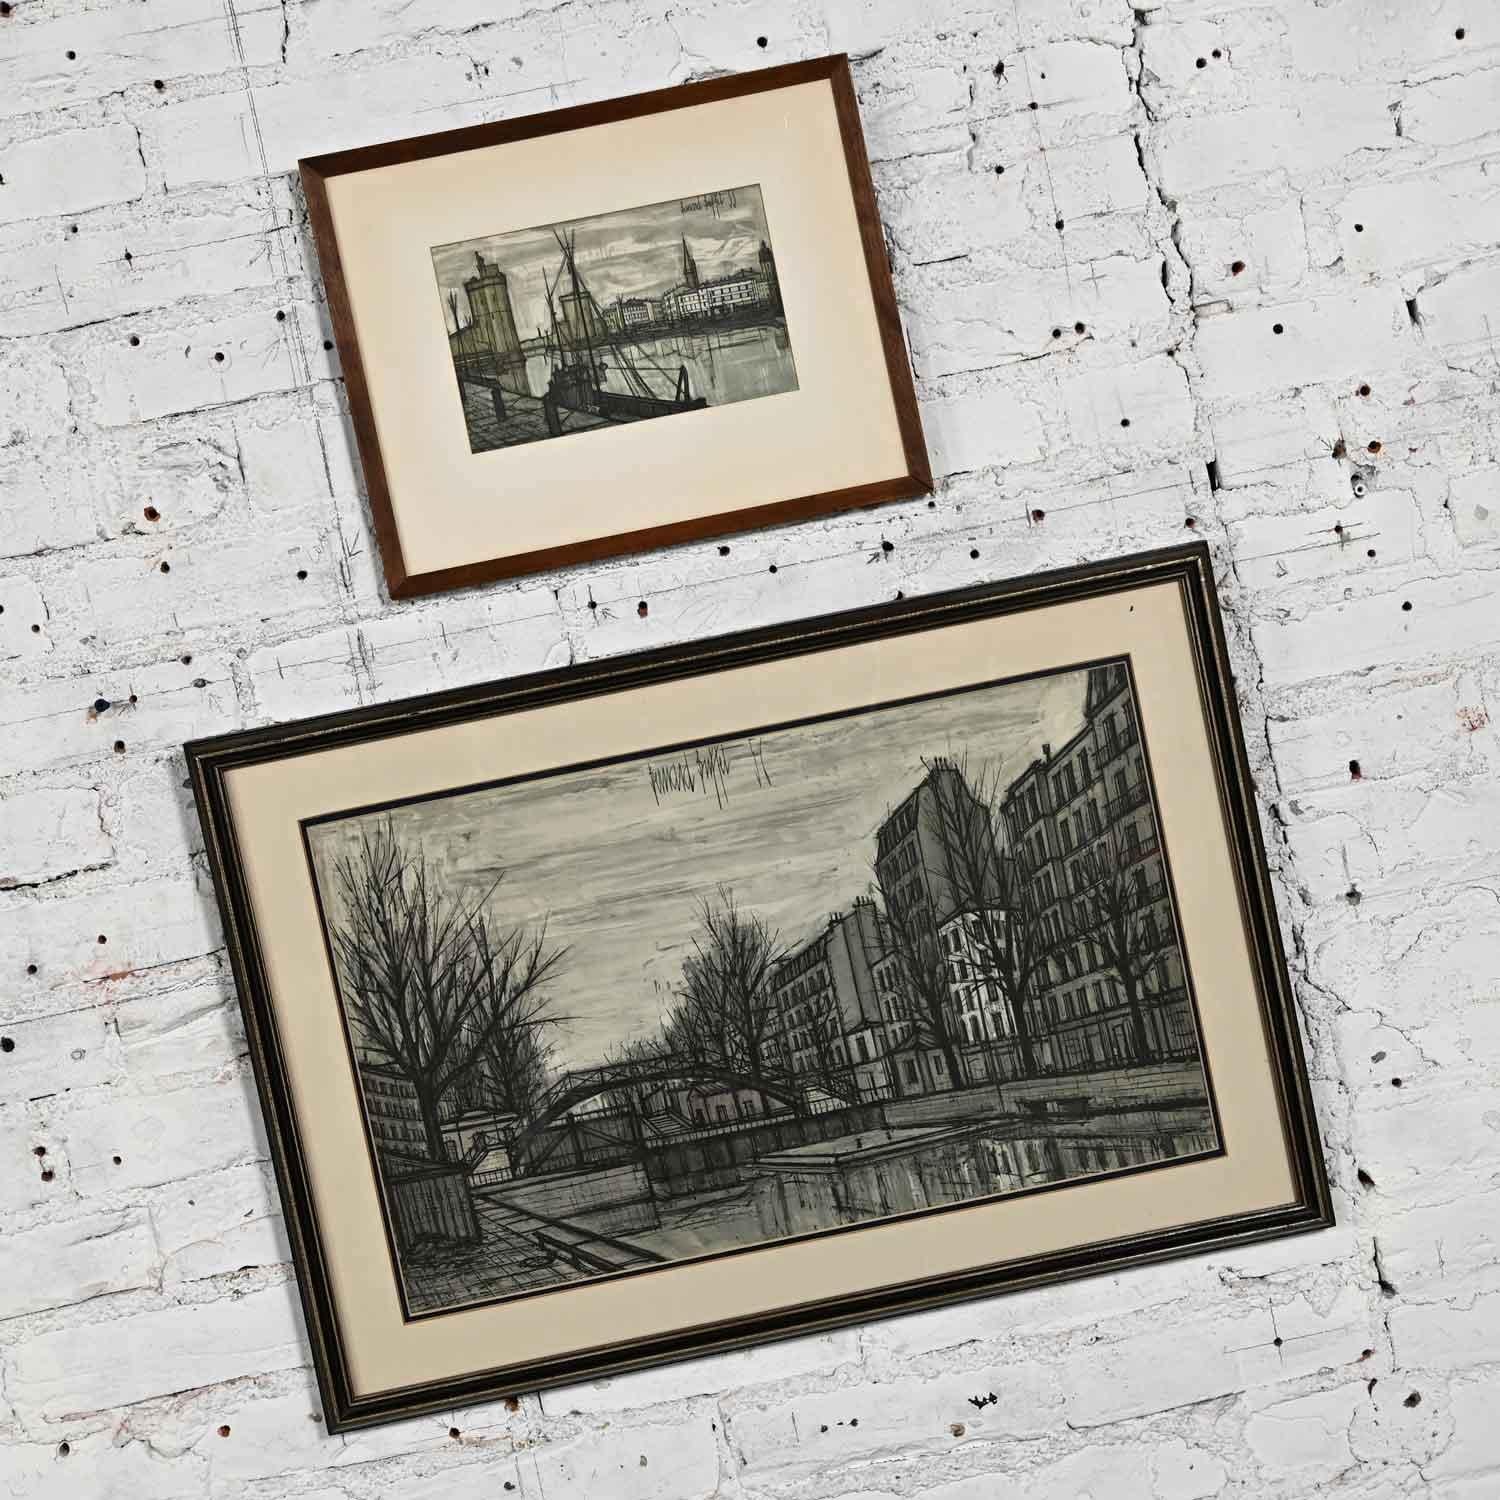 Fabulous vintage MCM or Mid-Century Modern “St. Martin Canal” and “France Port de La Rochelle” Bernard Buffet Lithograph framed and matted prints. These vintage prints are signed and dated in the printing process but do not have original pencil